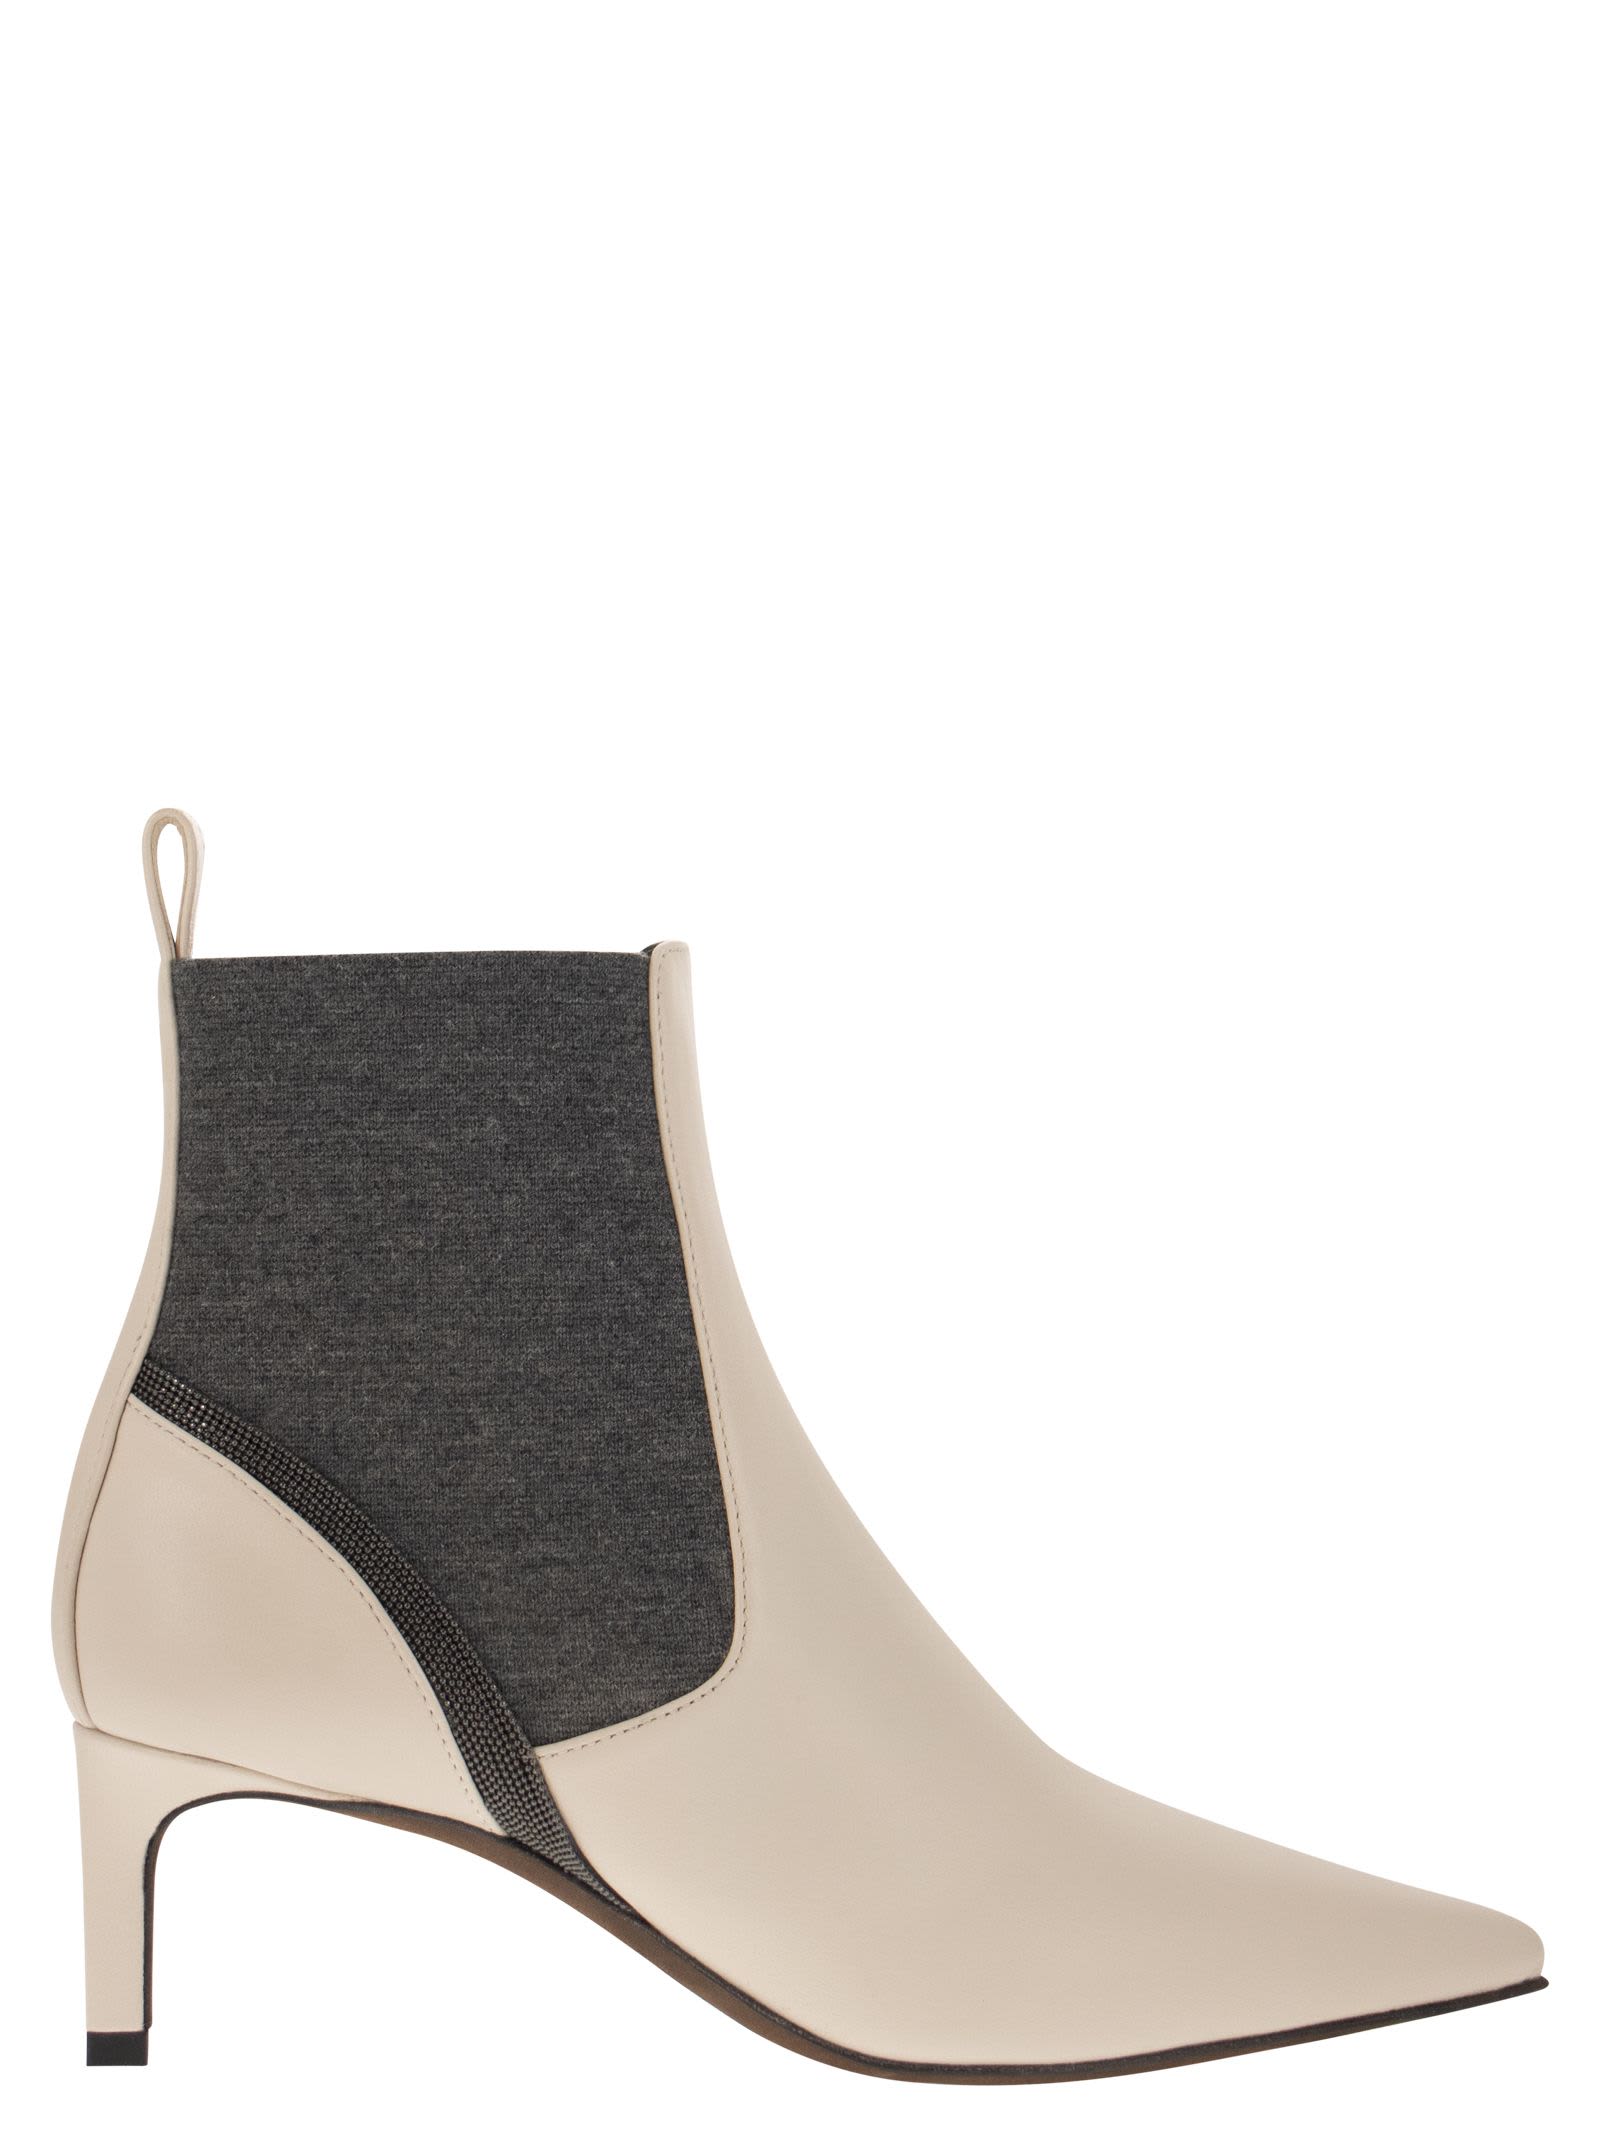 BRUNELLO CUCINELLI LEATHER HEELED ANKLE BOOTS WITH SHINY CONTOUR